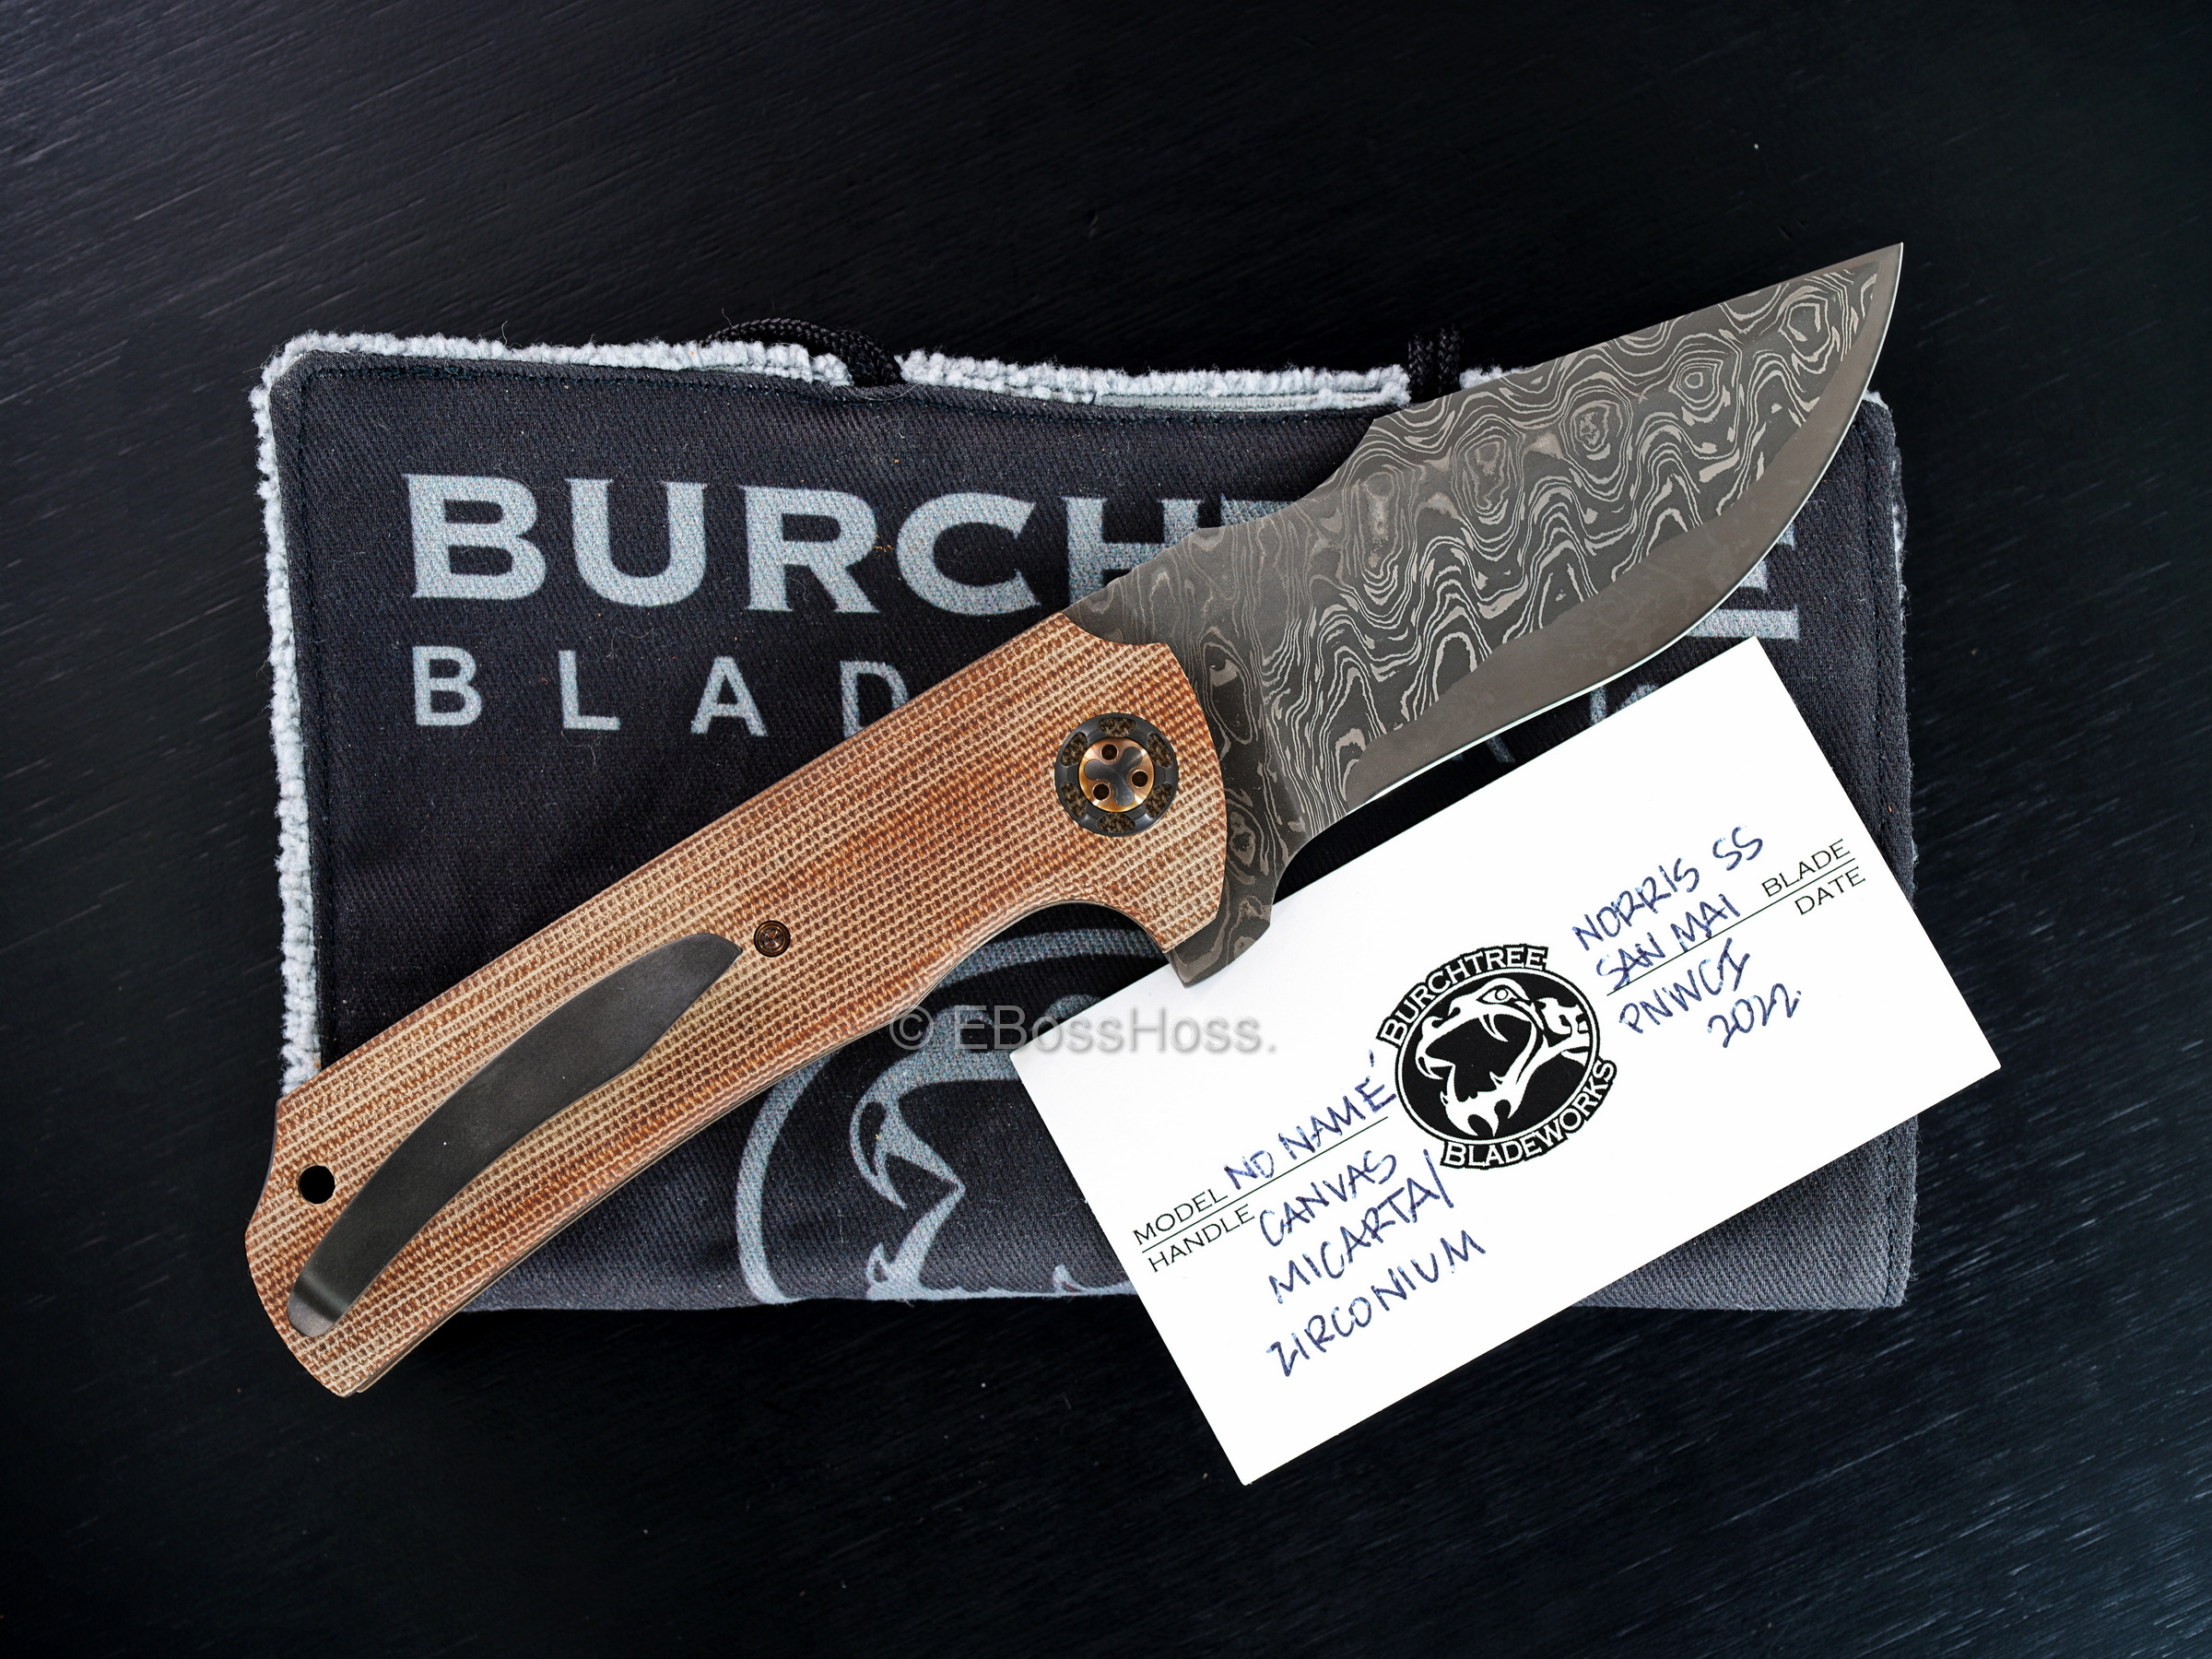 Burchtree Bladeworks Custom Deluxe No Name Flipper by Michael Burch